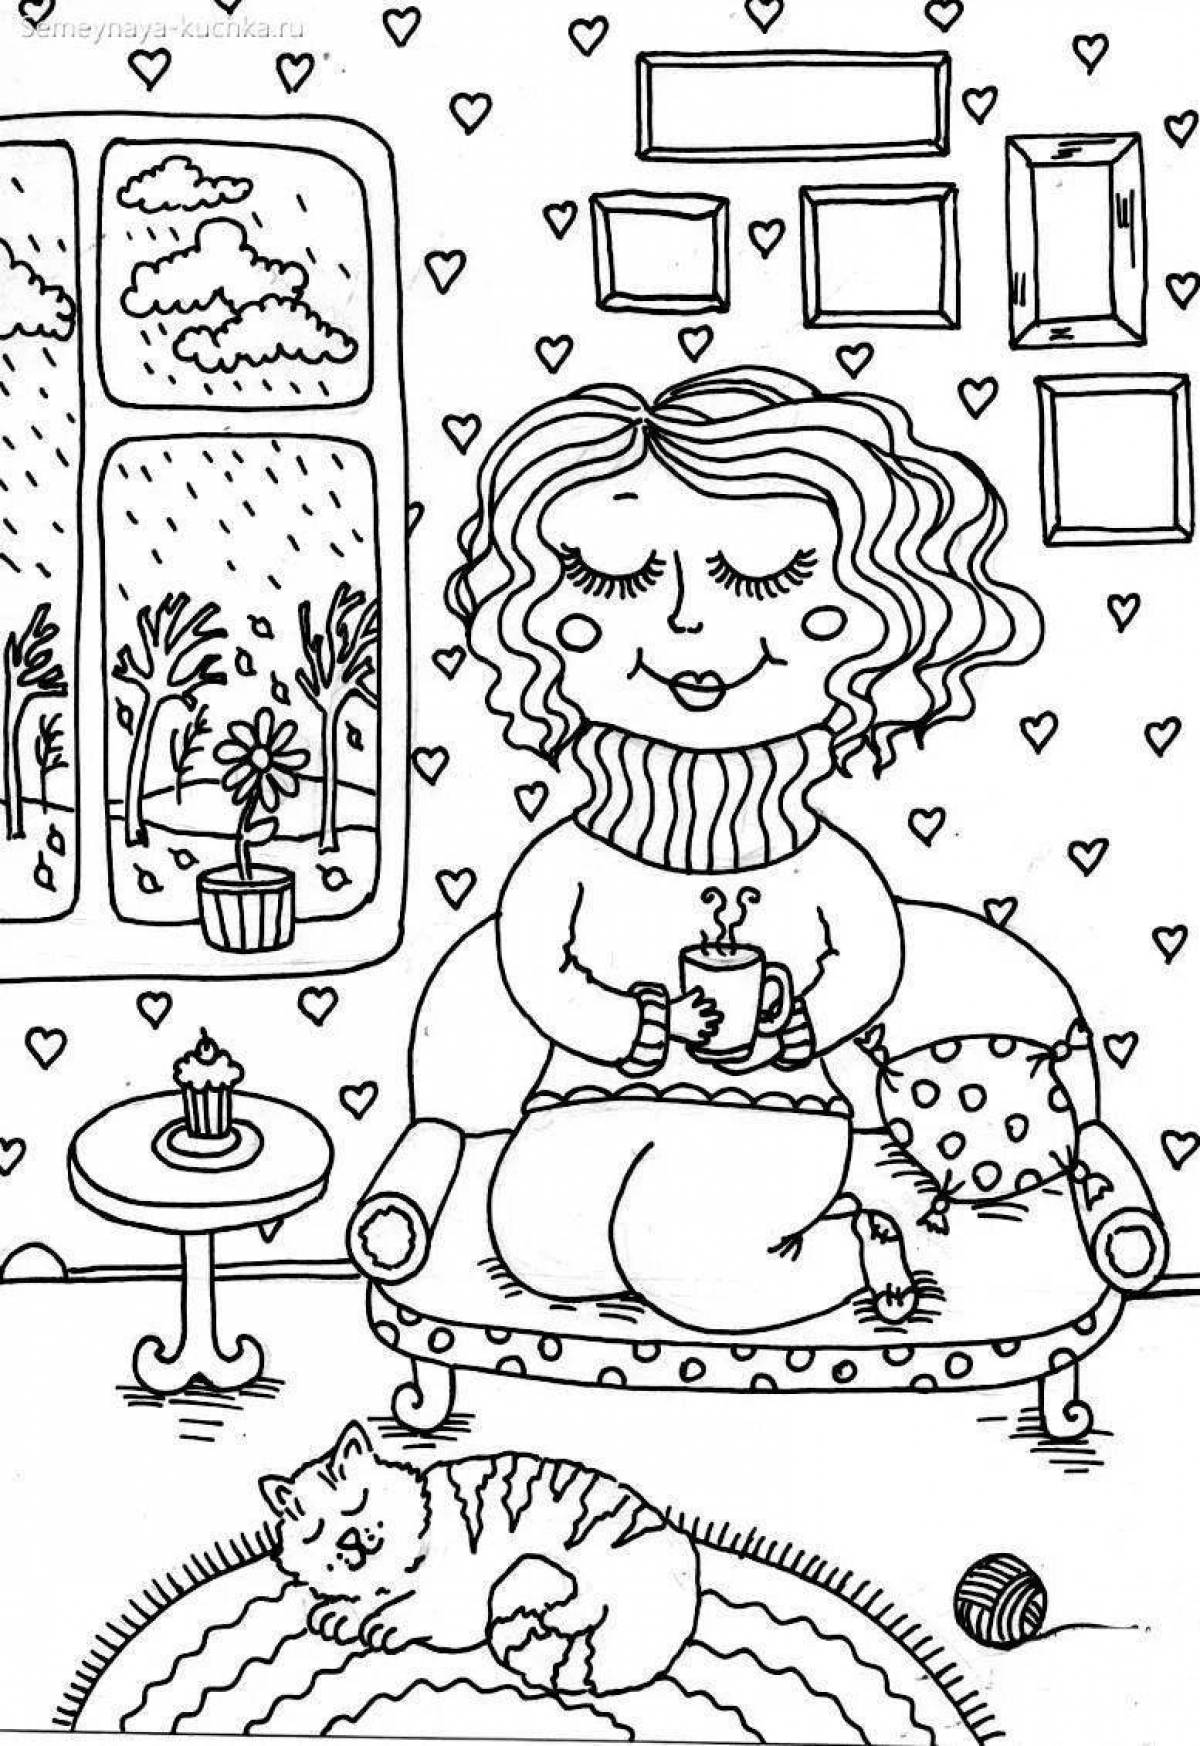 Relaxing cozy coloring book